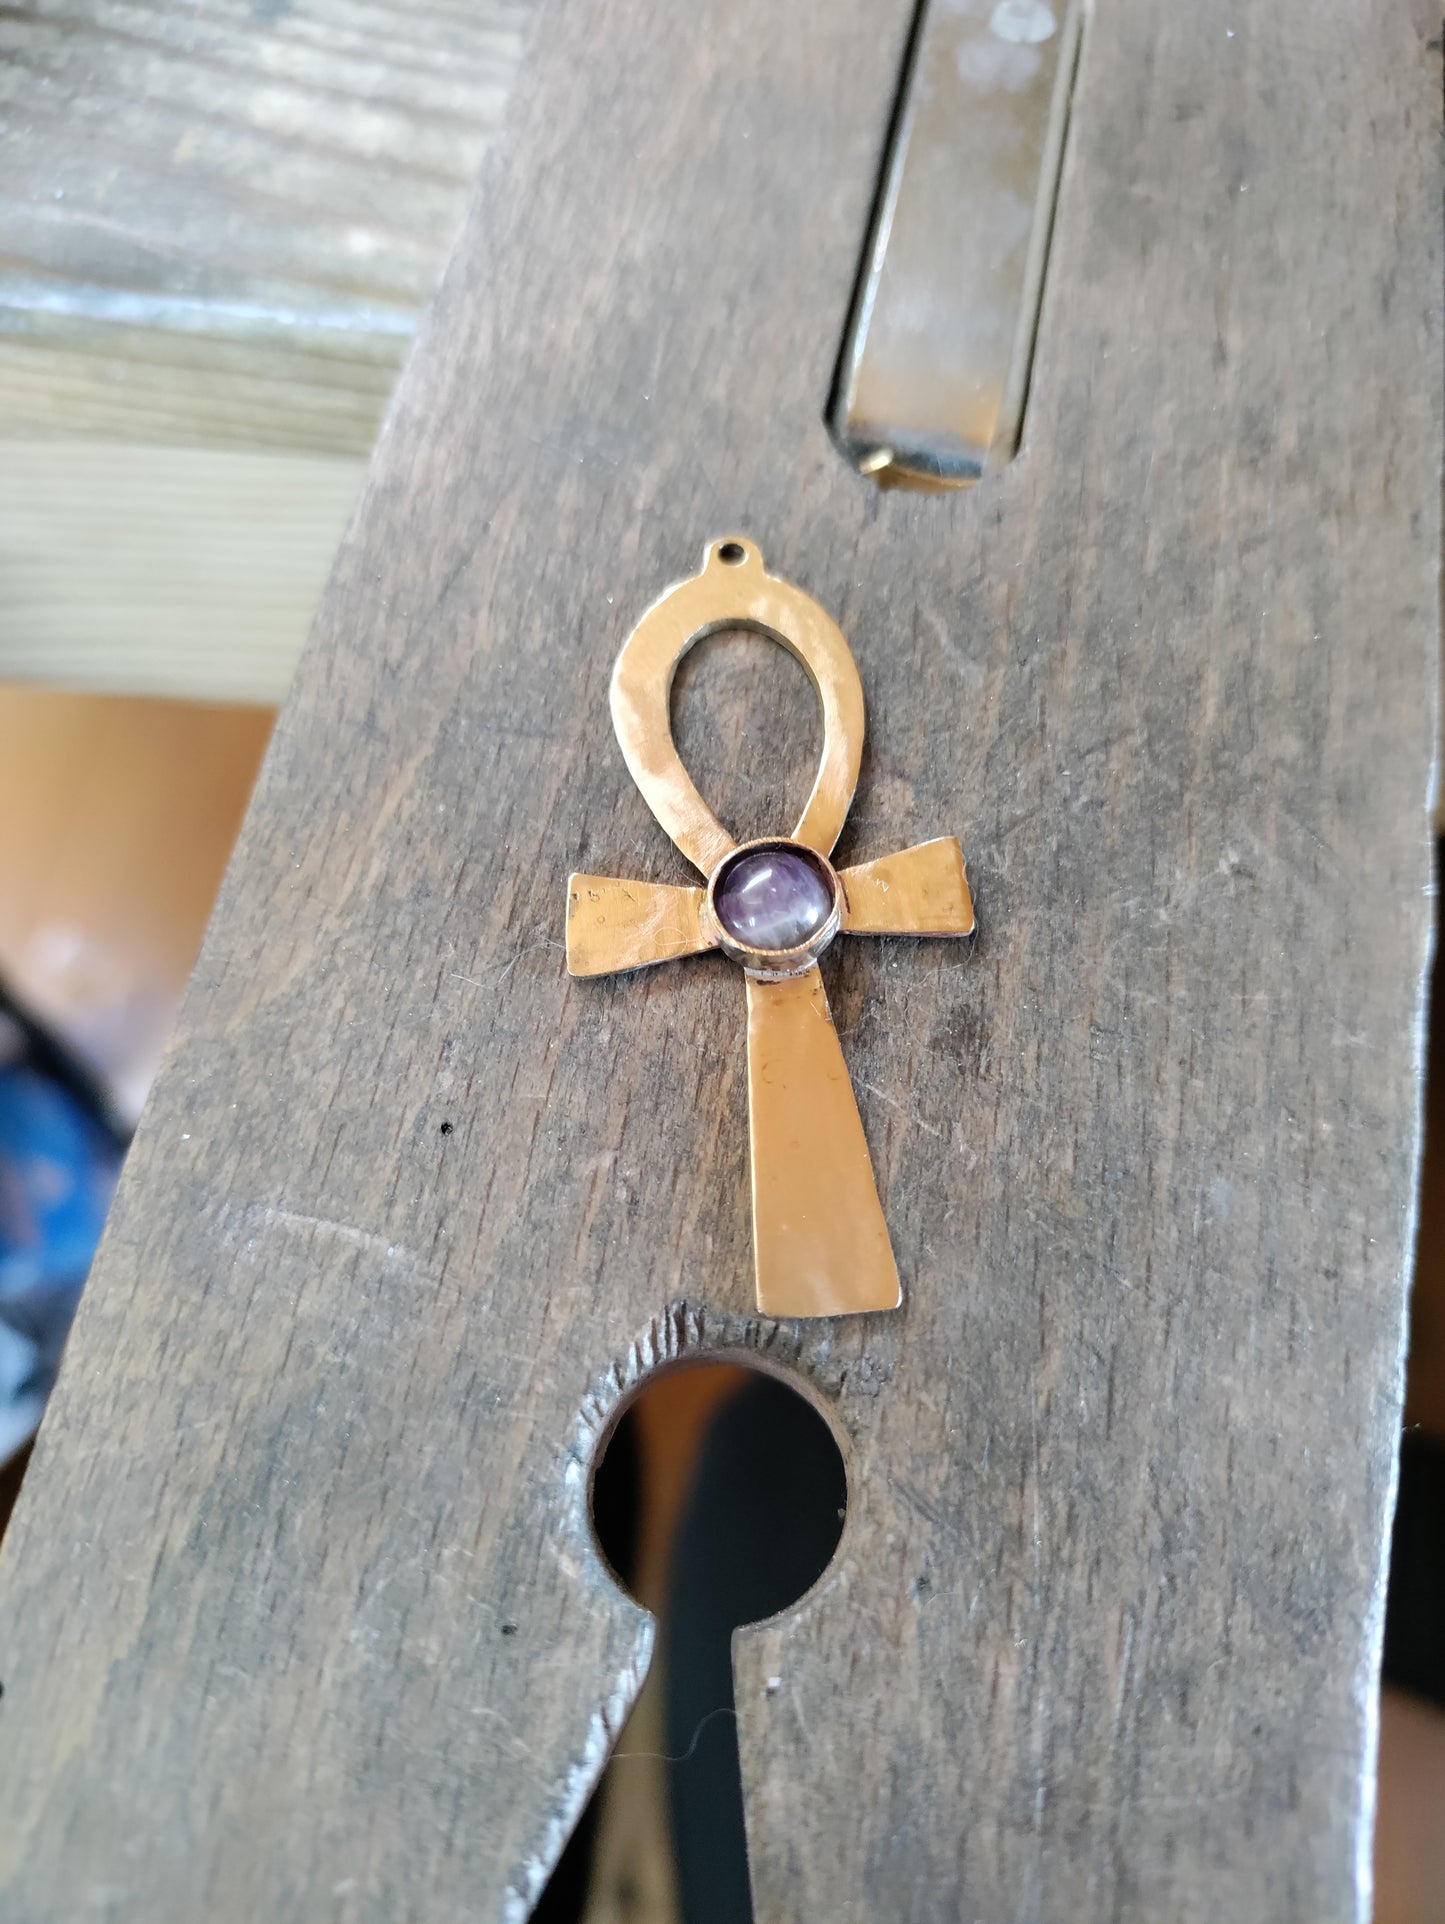 Golden brass Egyptian cross pendant Ankh with amethyst LEIA&CO